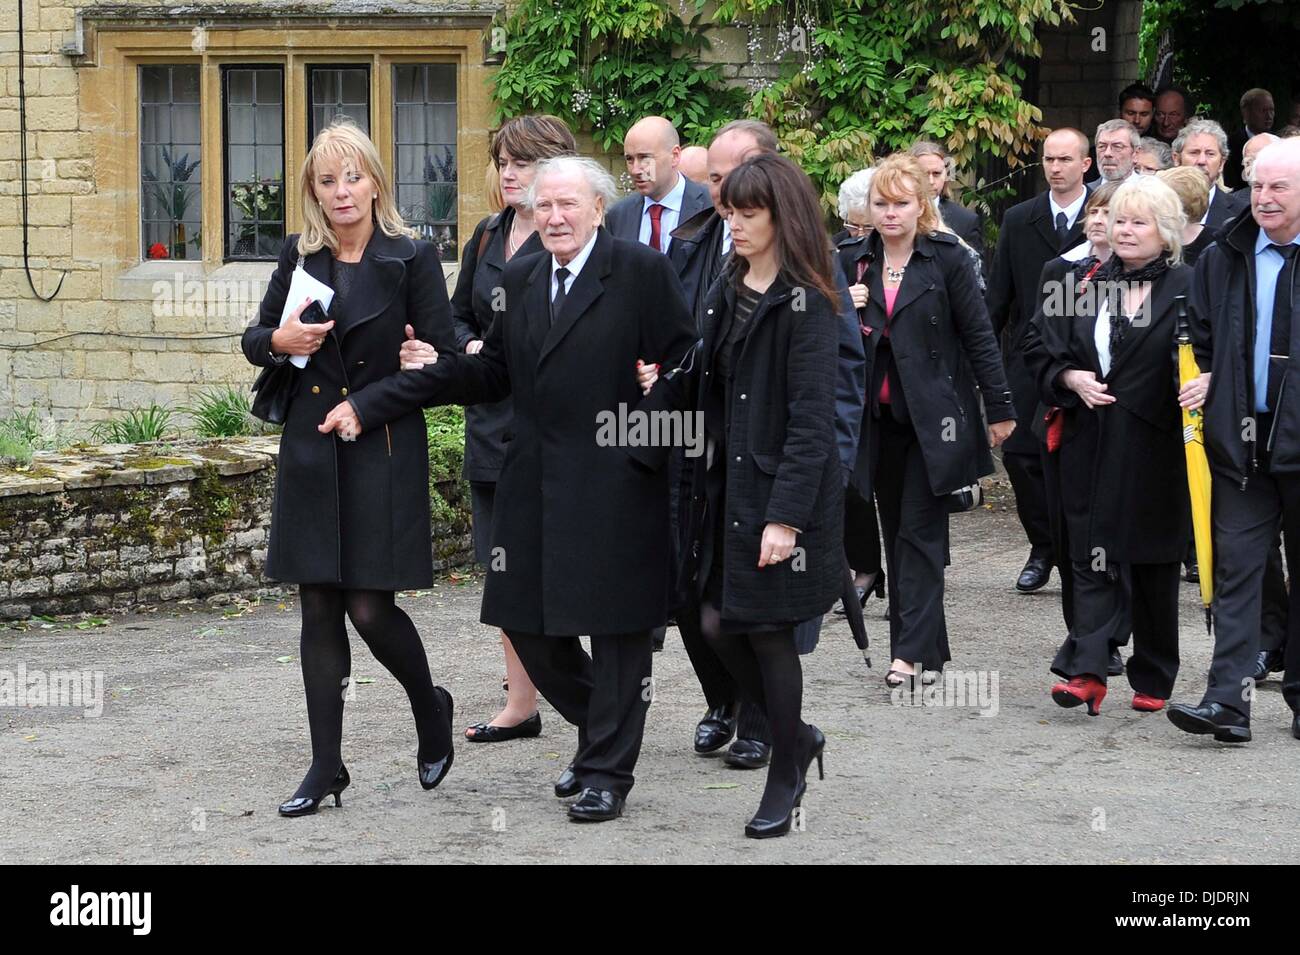 Leslie Phillips The funeral of Robin Gibb held in his home town of Thame Oxfordshire, England - 08.06.12 Stock Photo